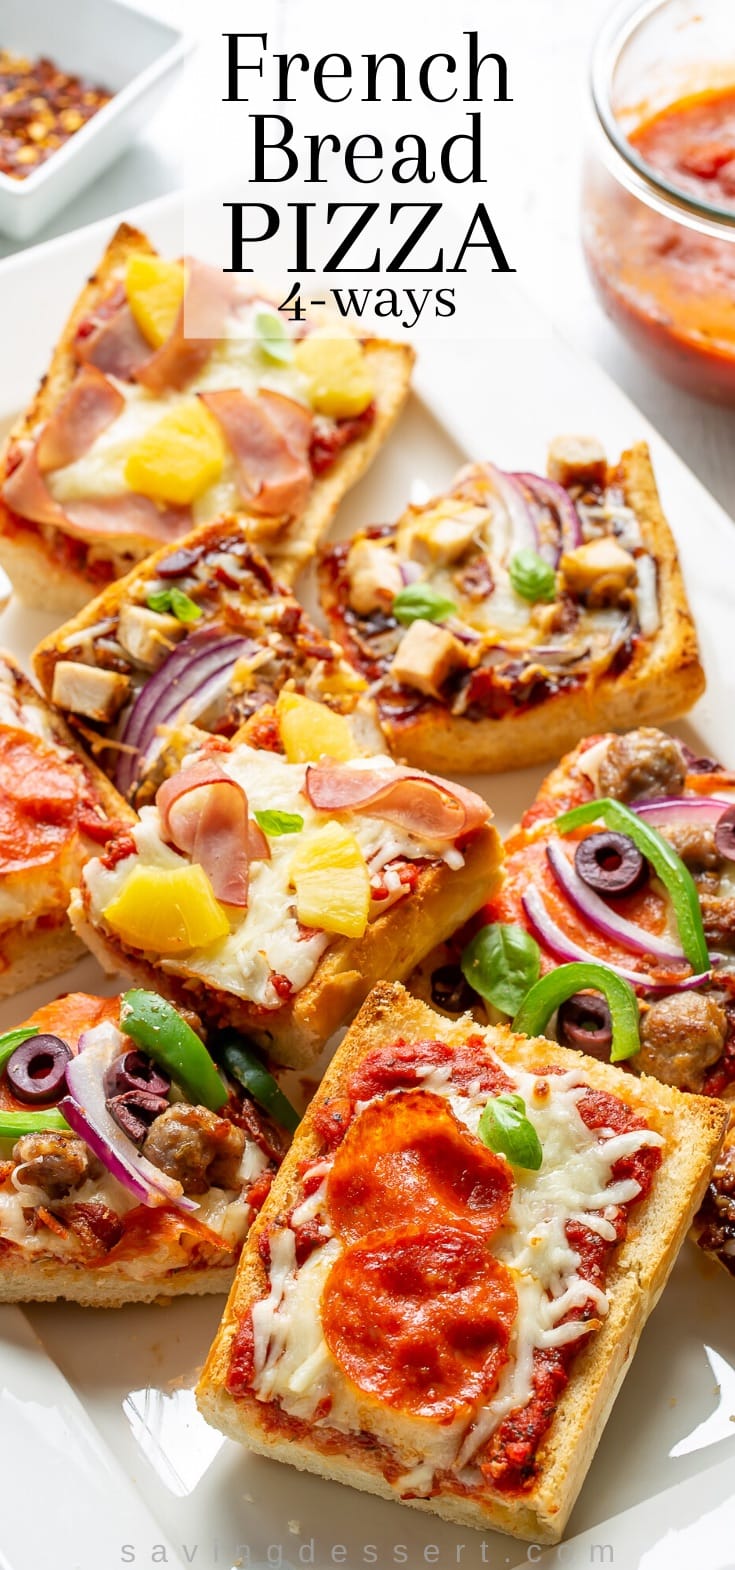 Individual slices of French bread pizza with pepperoni, pineapple, ham and other toppings